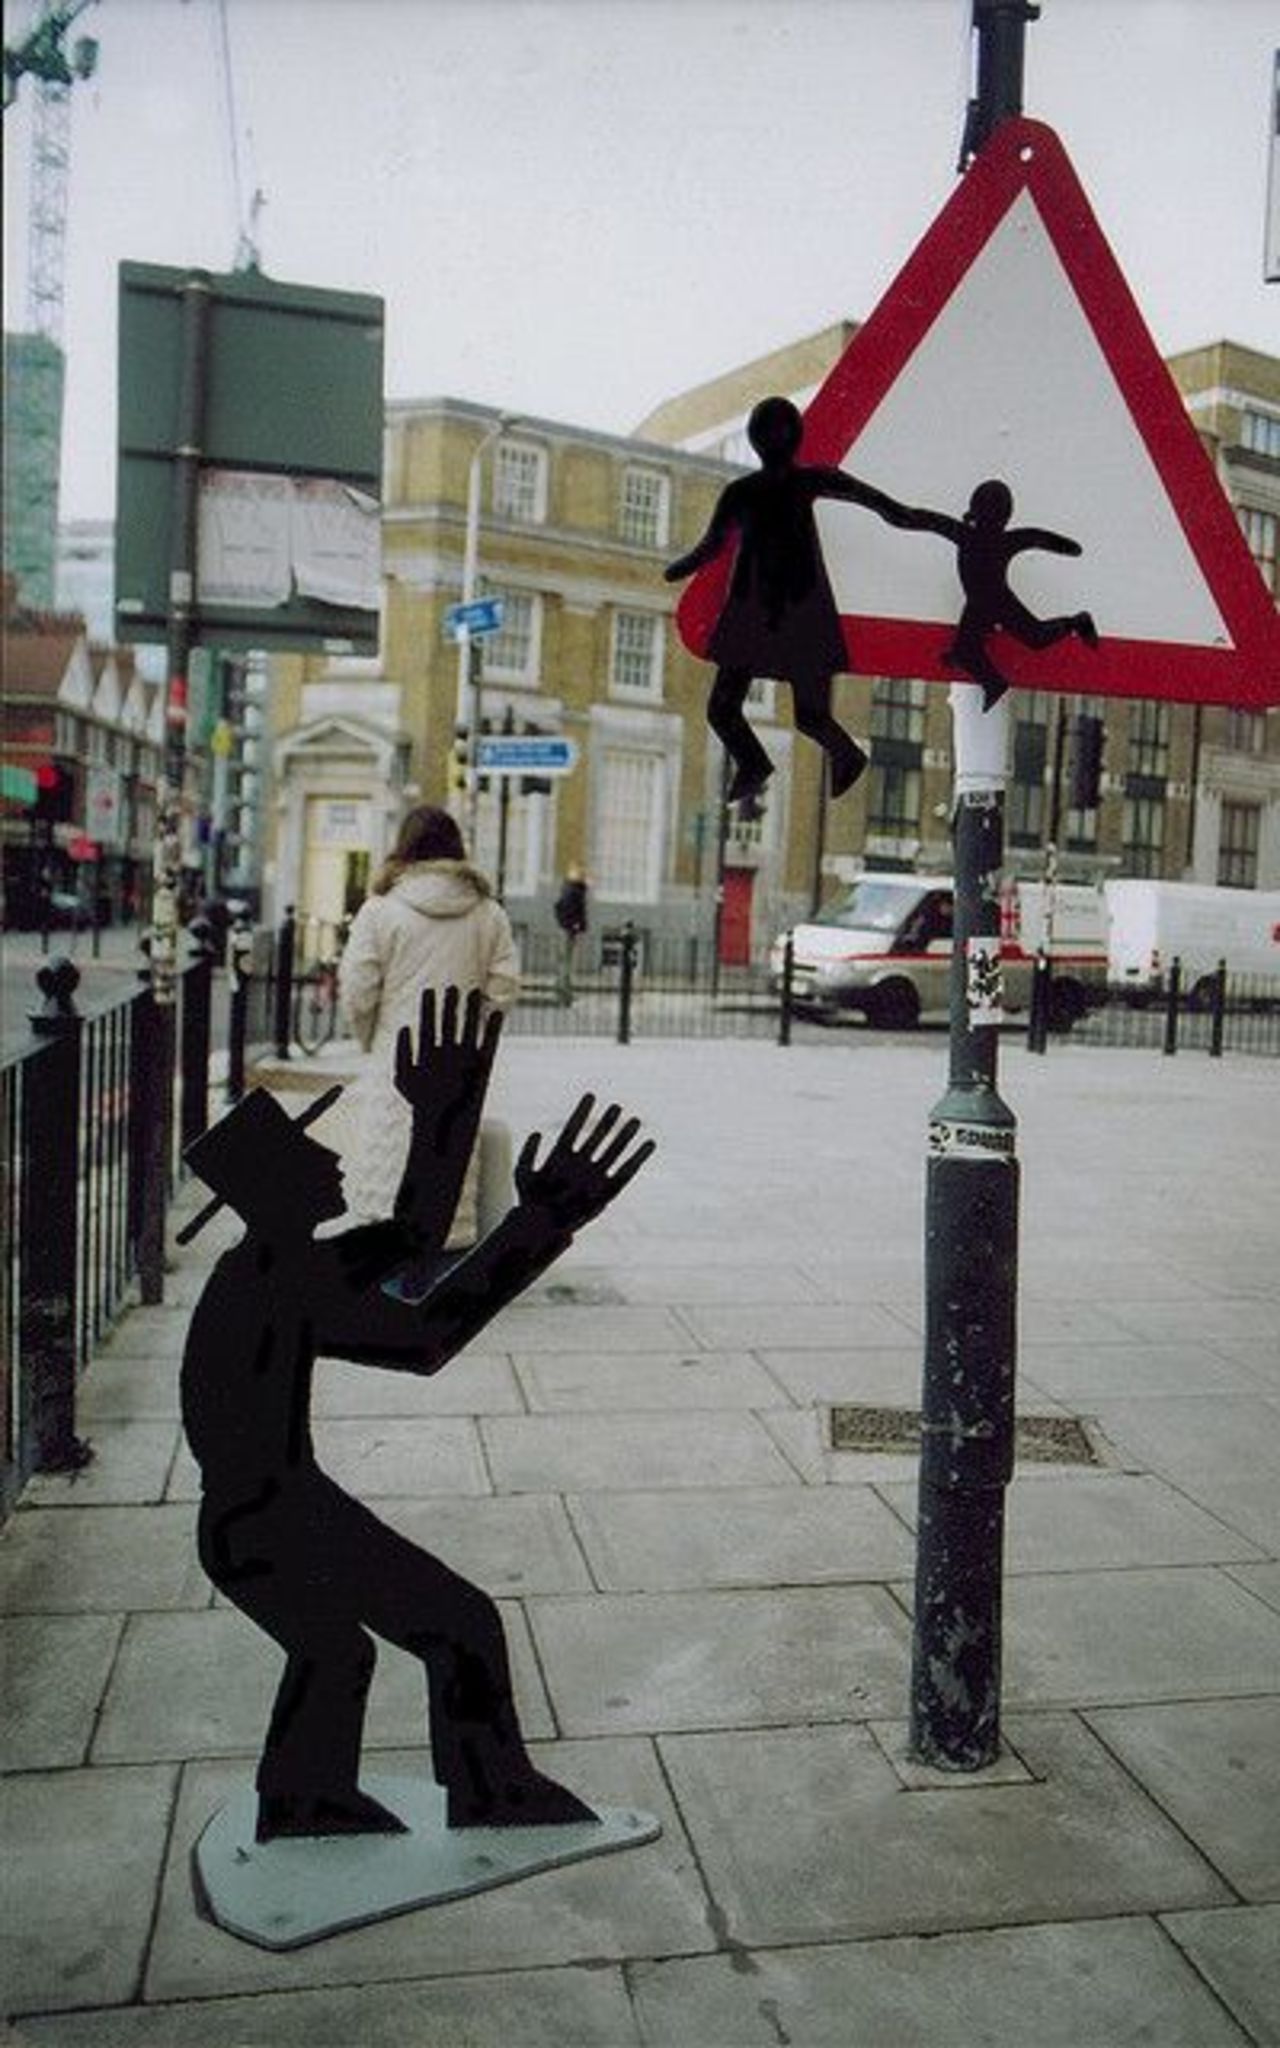 Clever street #art from London #travel https://t.co/wGote5Kb6Q